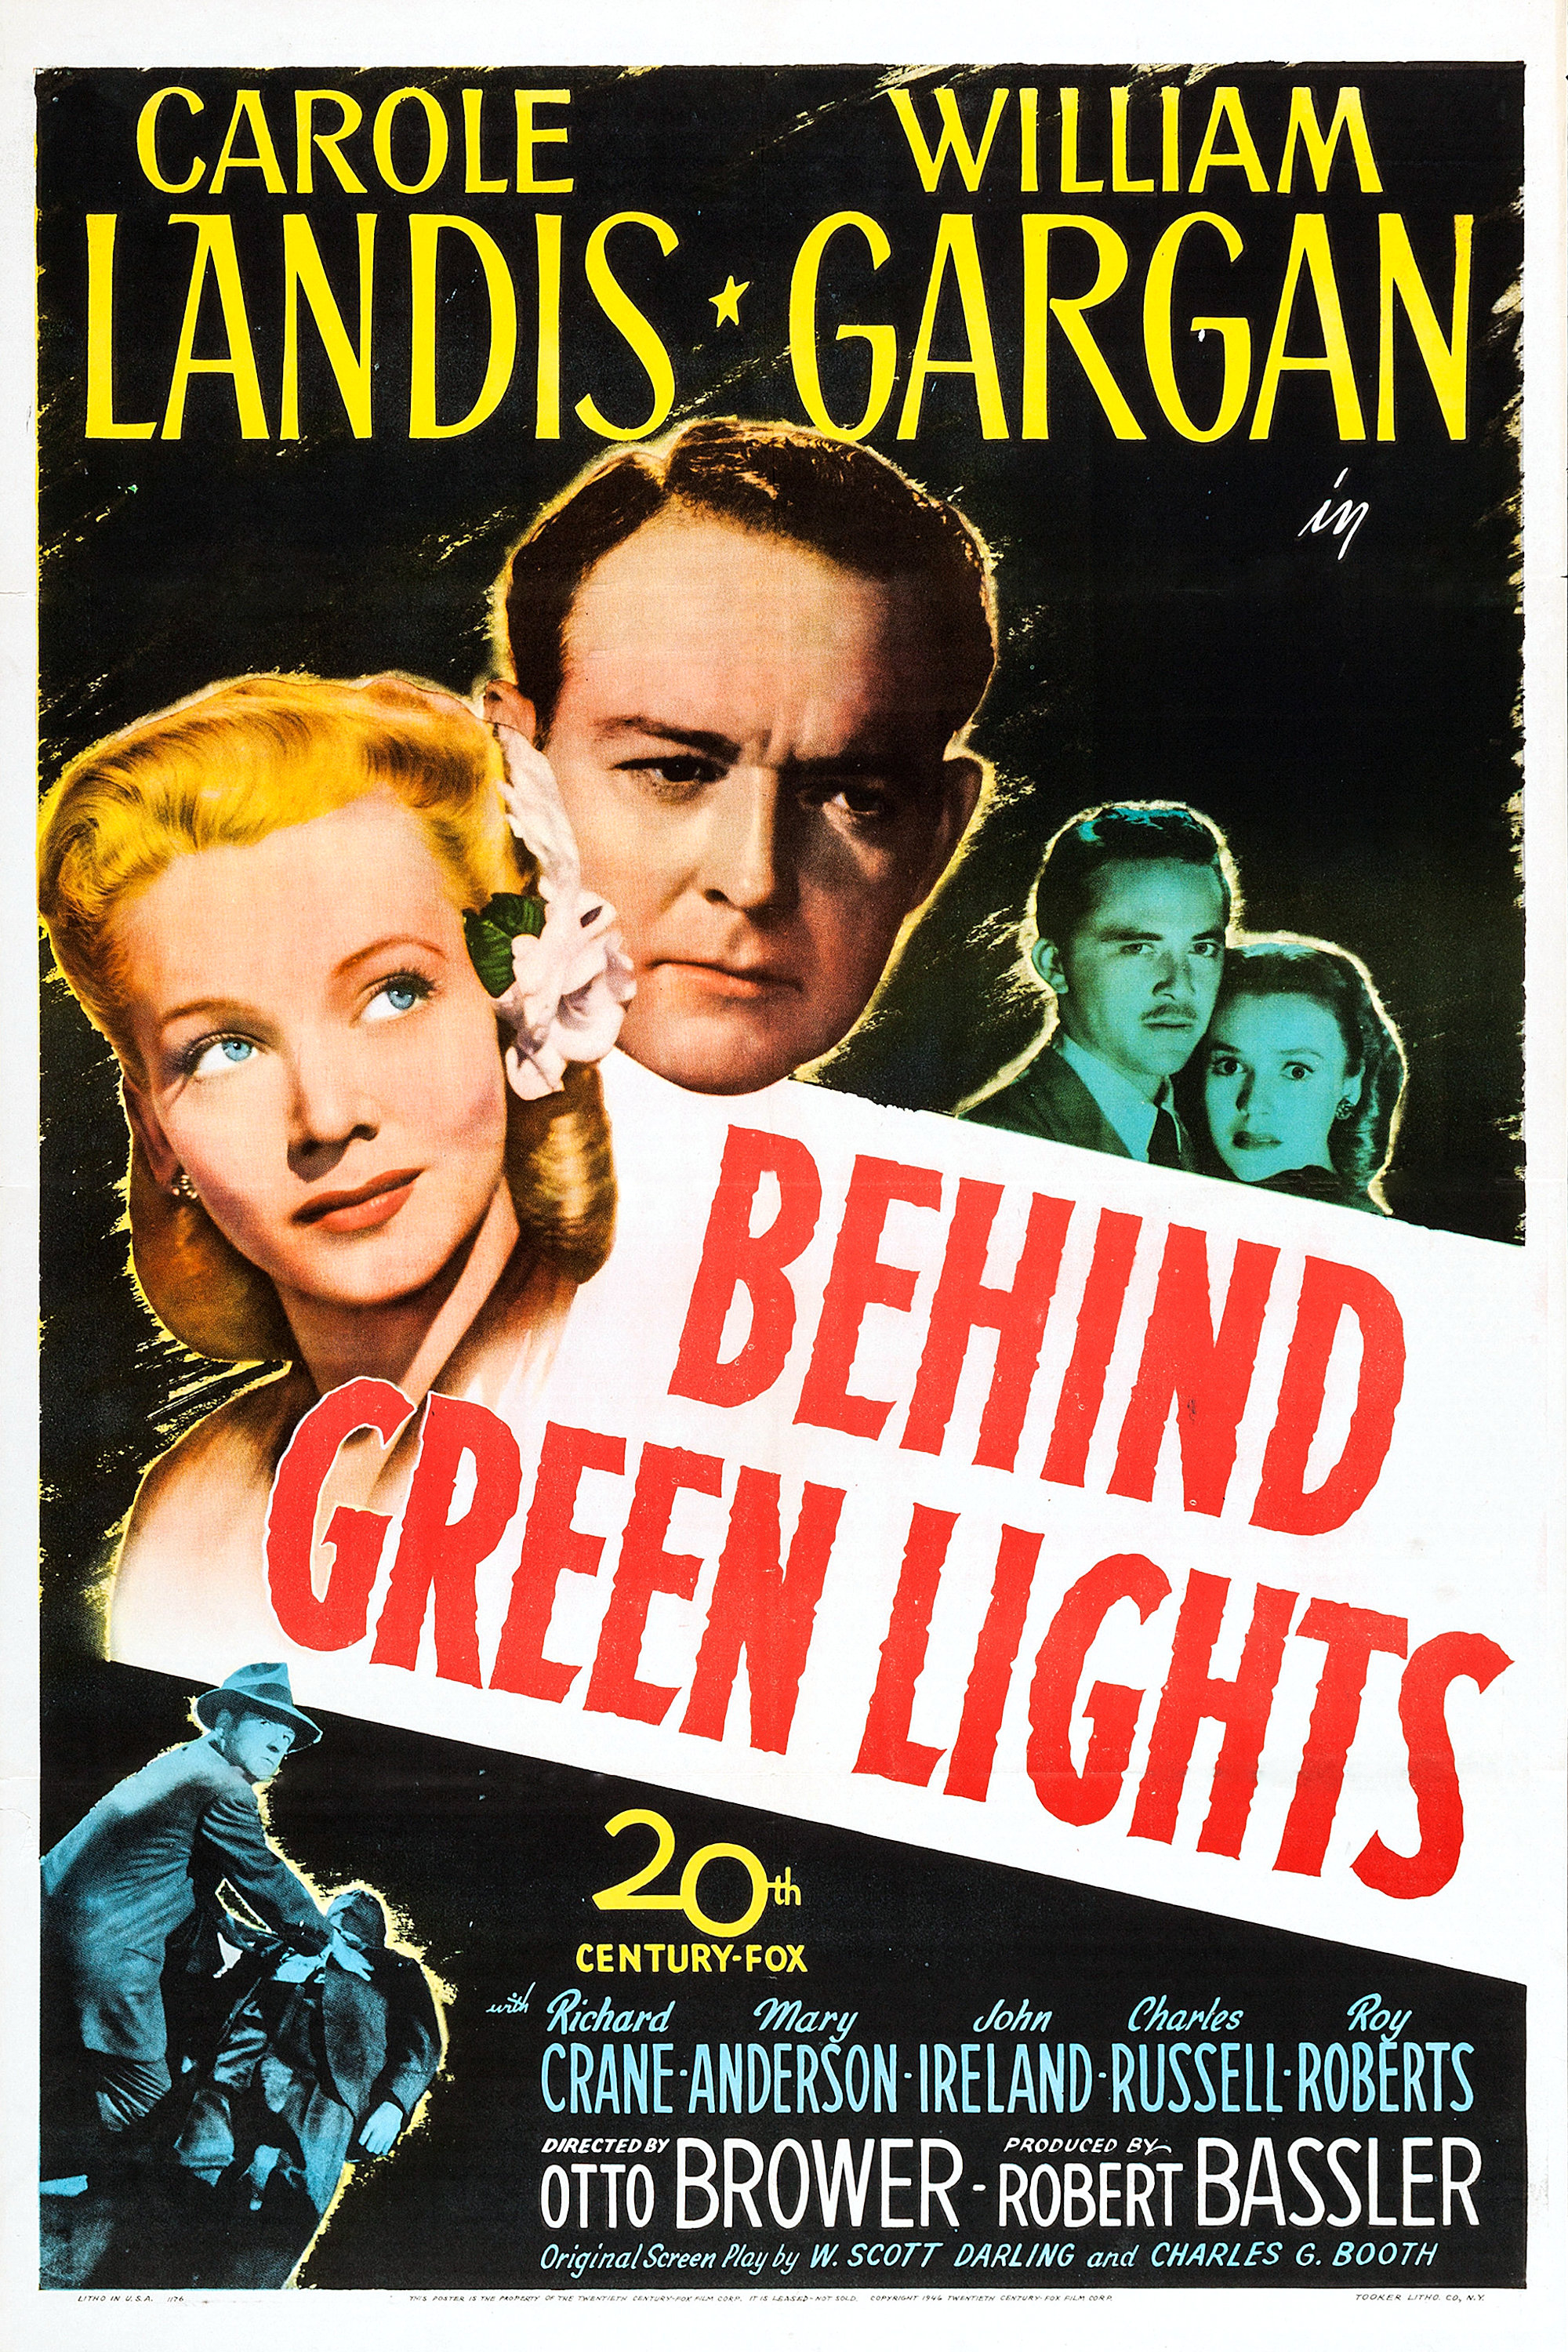 Poster for the 1946 adaptation of "Behind Green Lights"